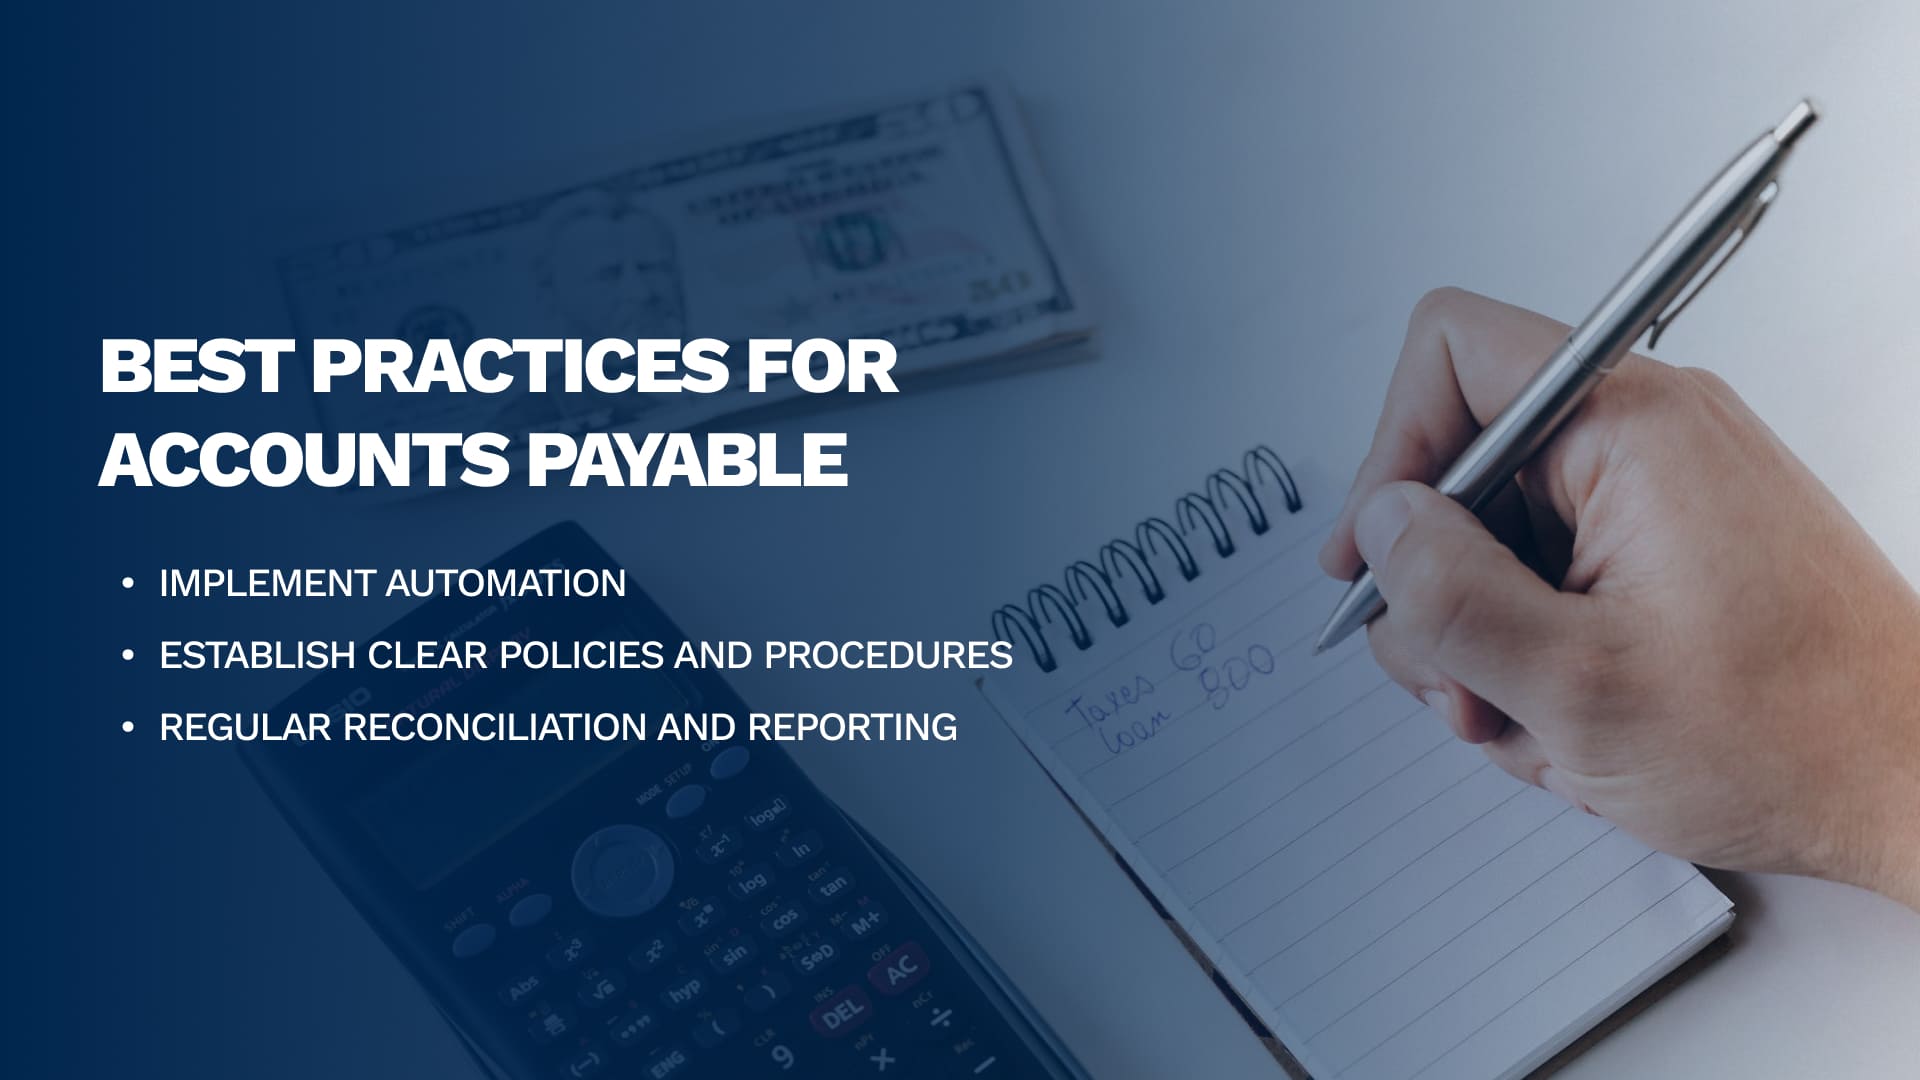 Best Practices for Accounts Payable